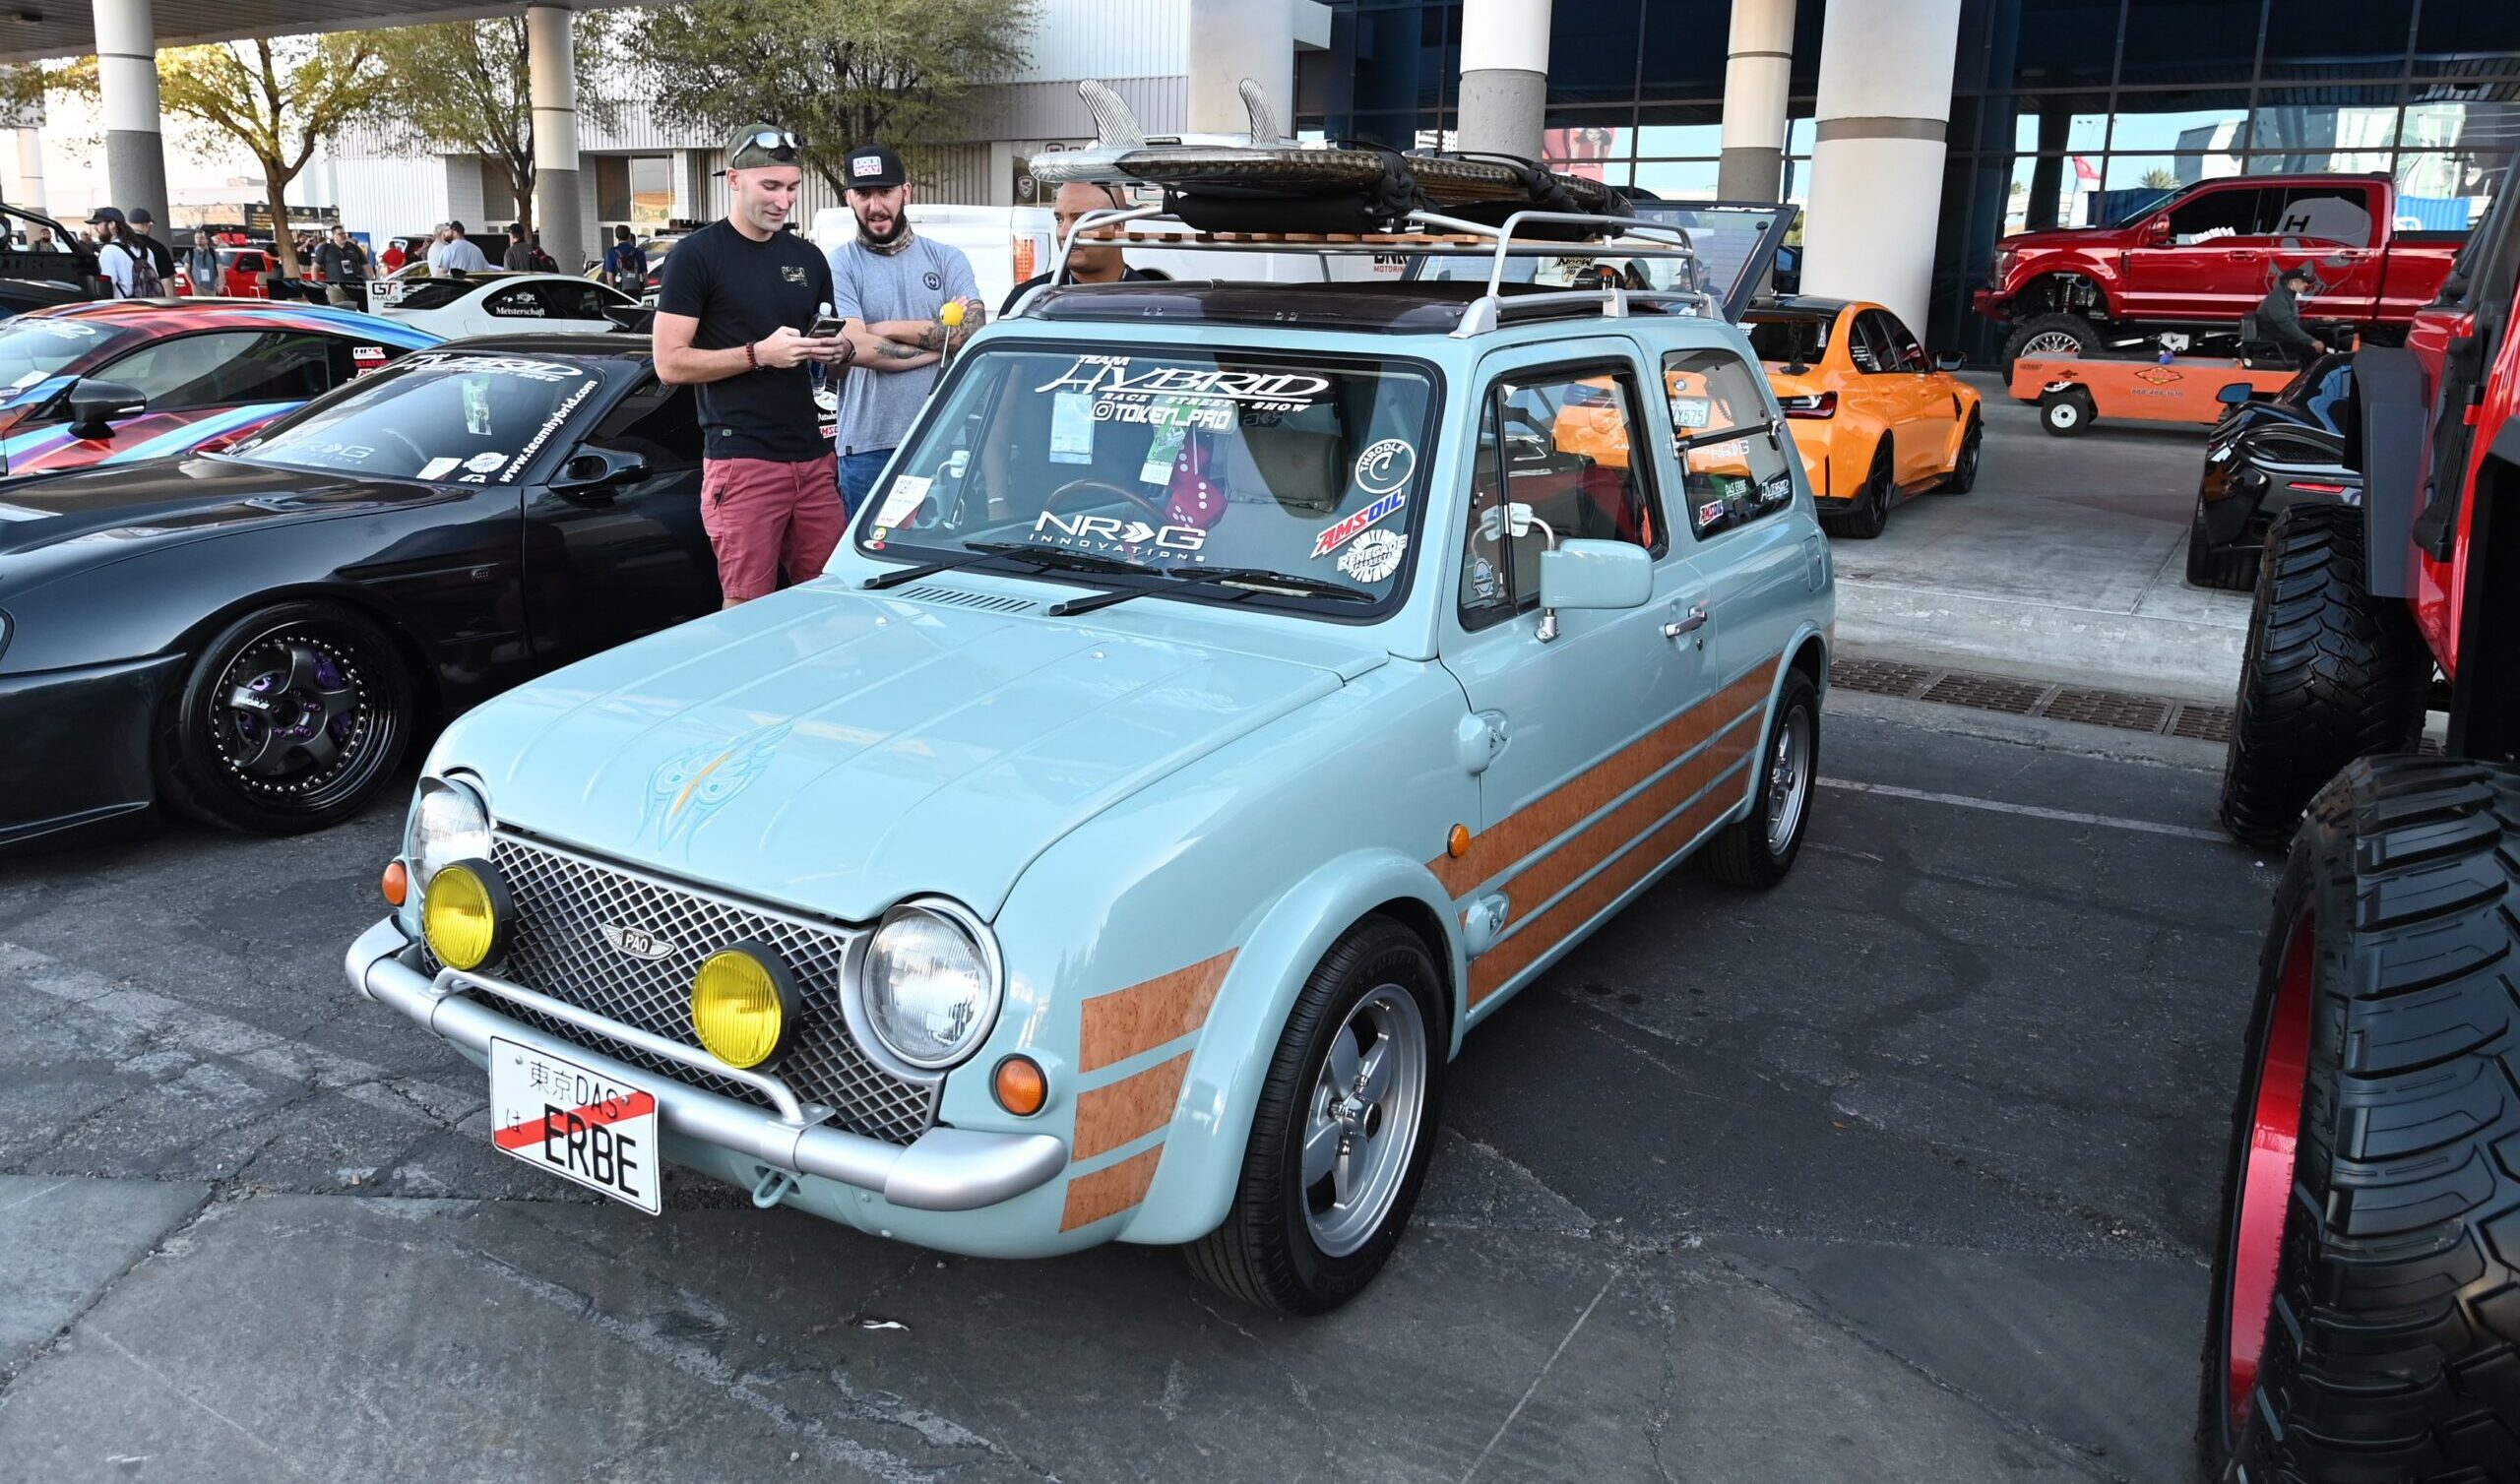 SEMA Show App to Include Project Vehicle Details | THE SHOP